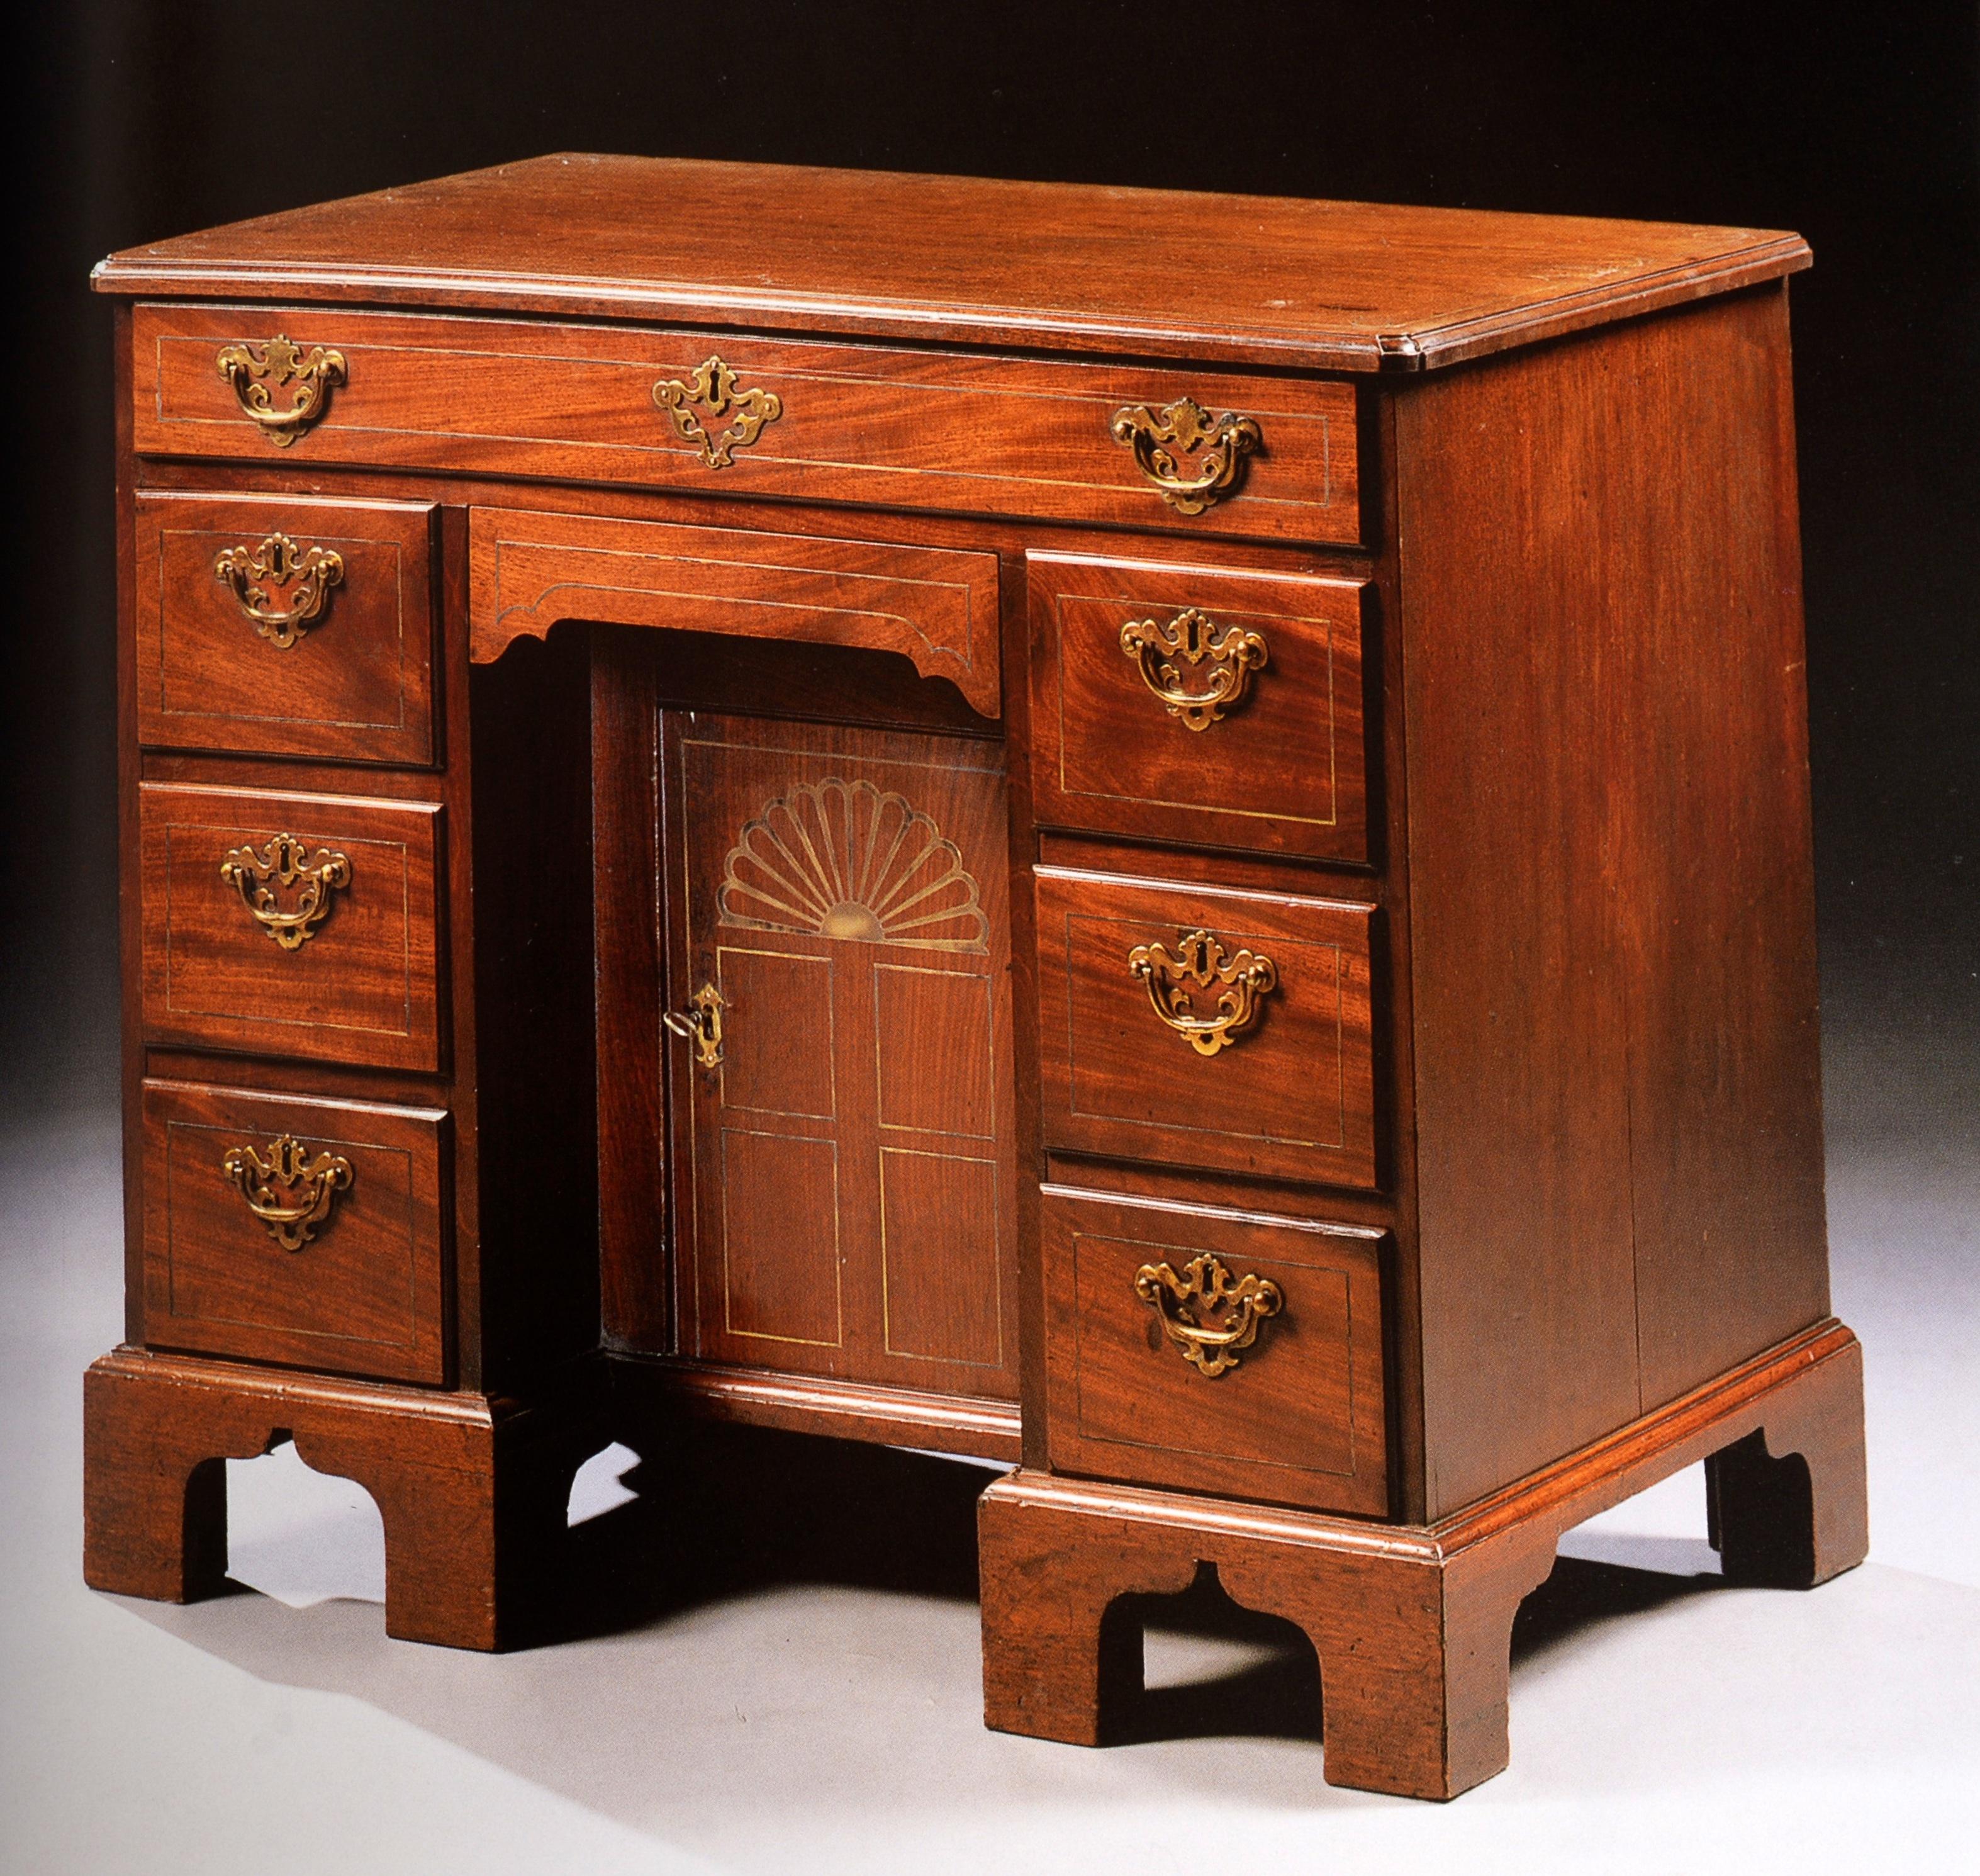 Important English Furniture & Robert Harman Collection of 18th/19thc Tea Caddies For Sale 13